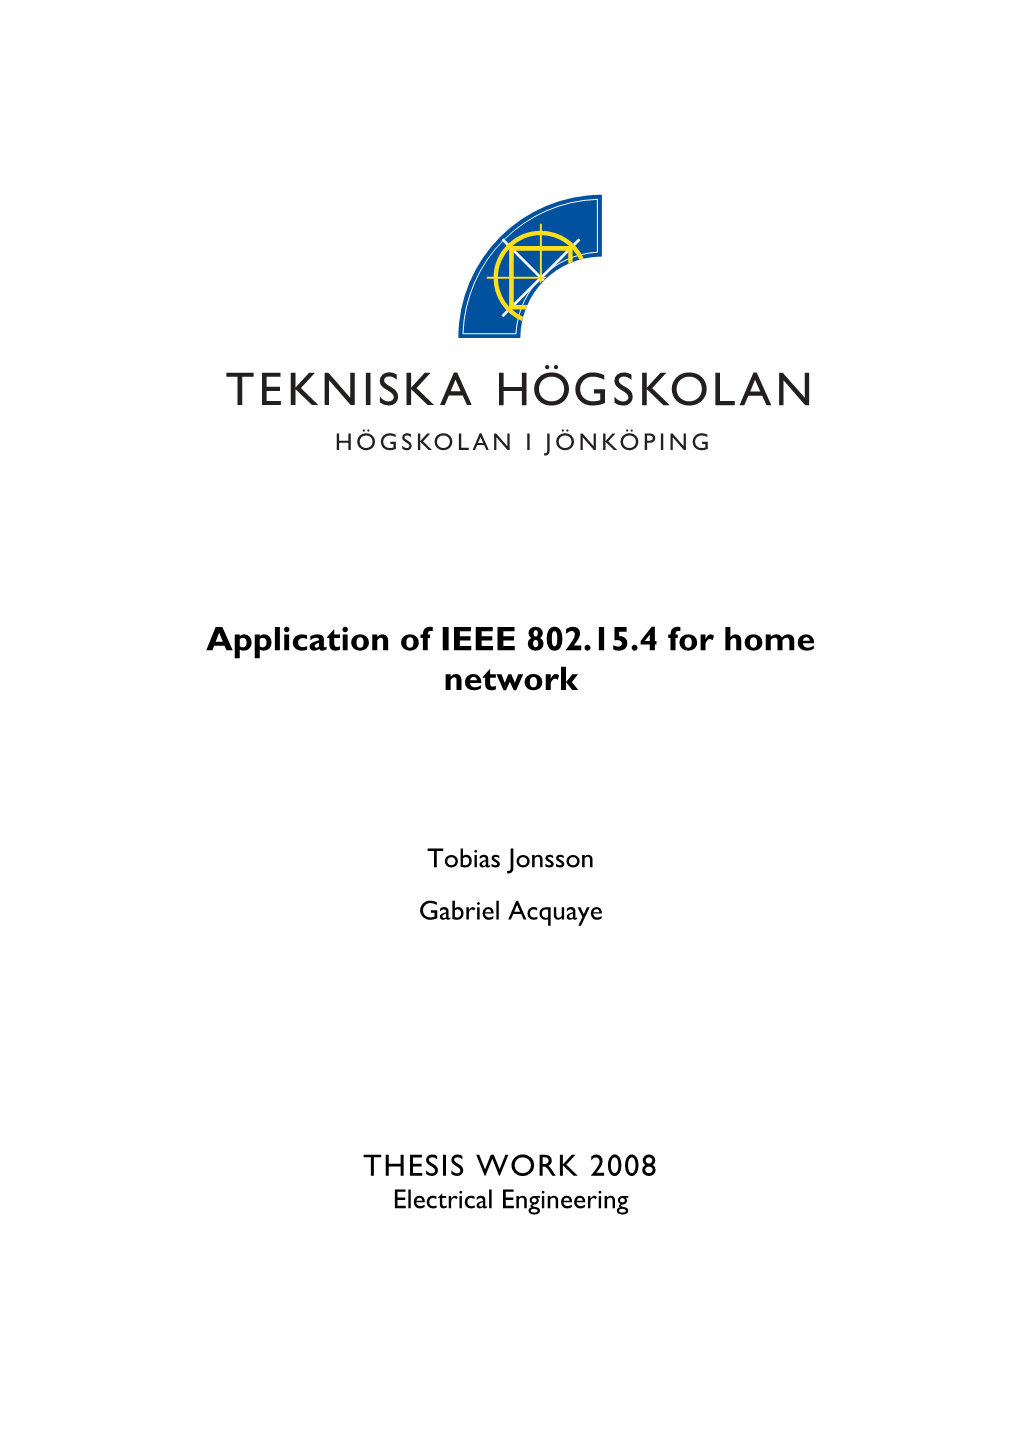 Application of IEEE 802.15.4 for Home Network